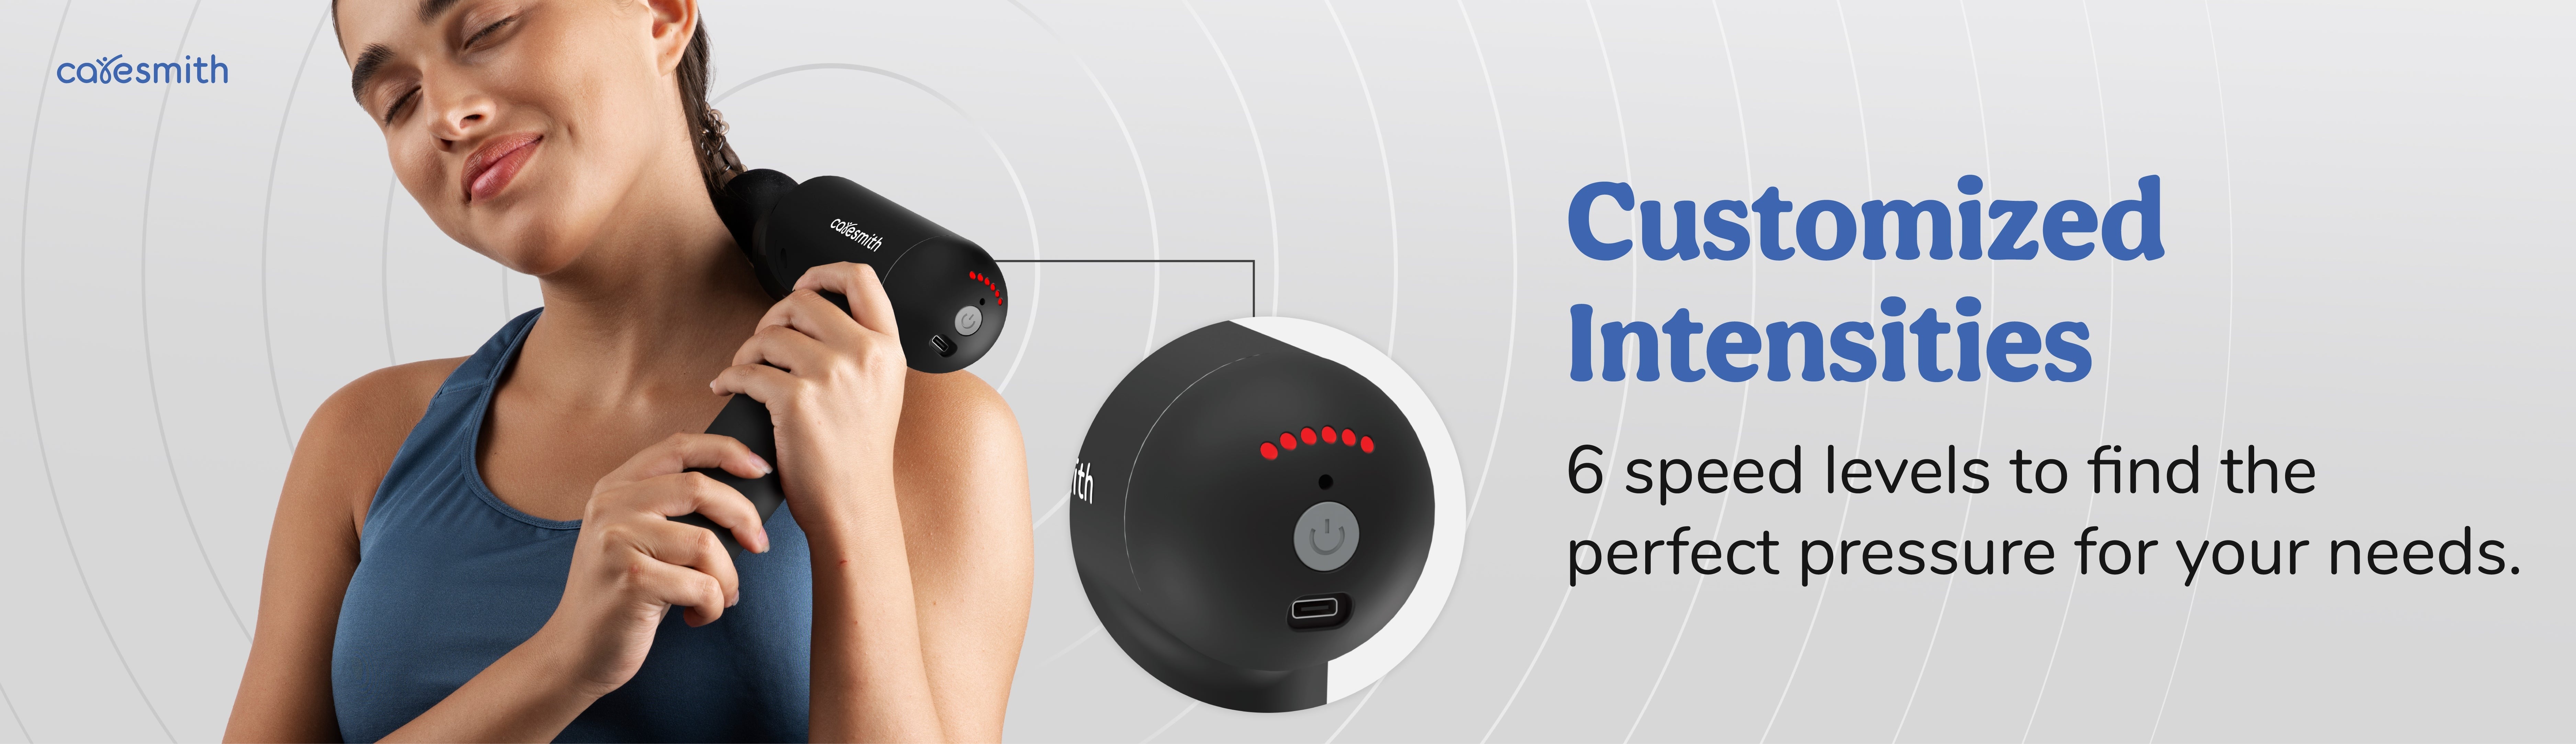 Caresmith Charge Boost Massage Gun with Customized Intensities